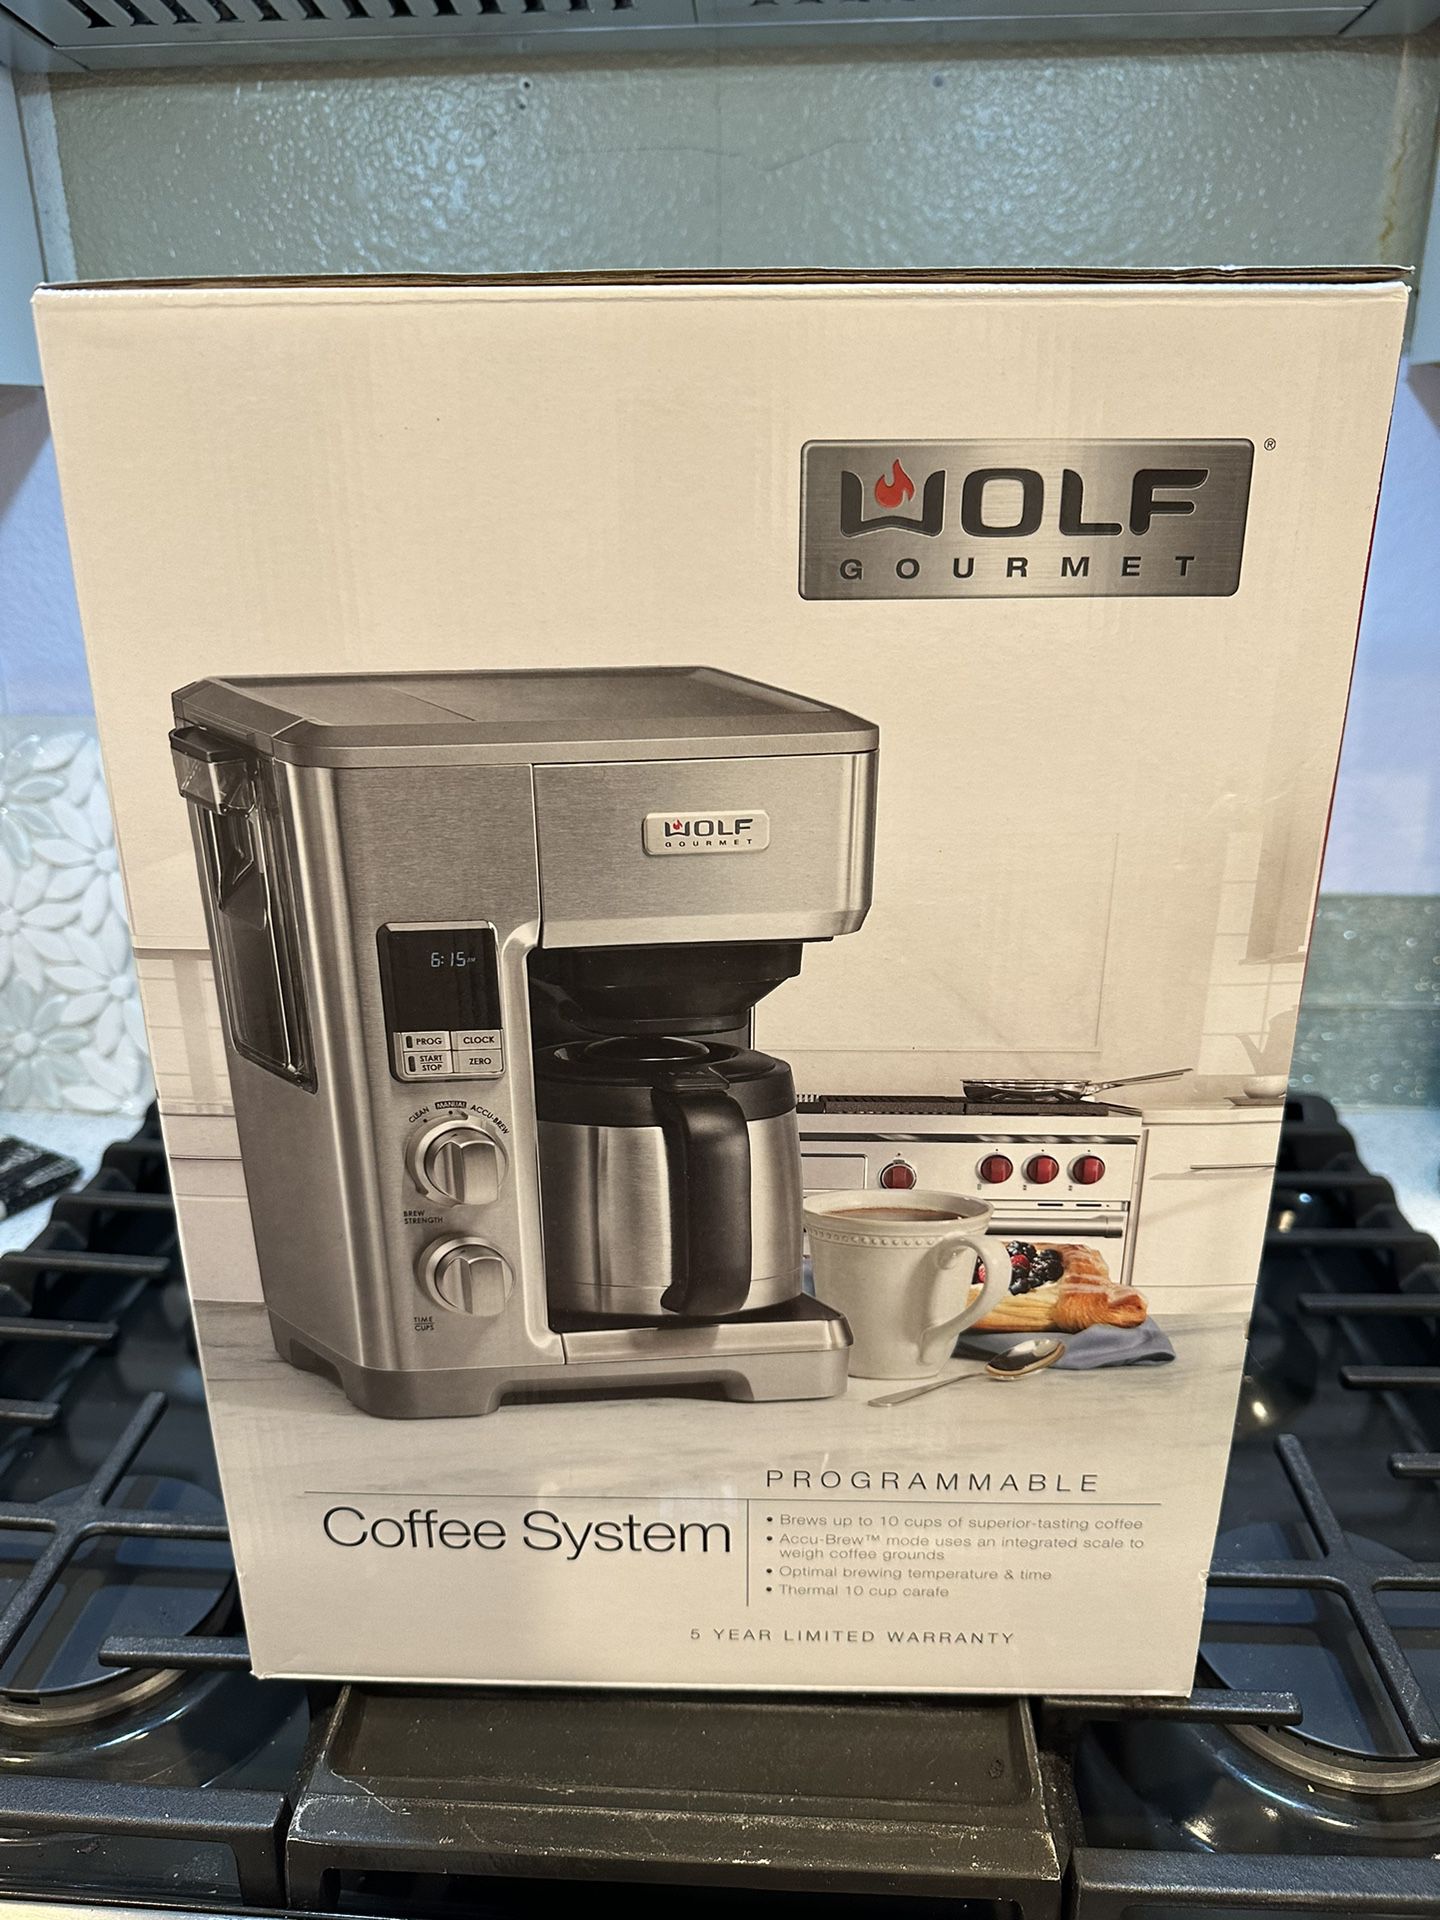 WOLF COFFEE MACHINE for Sale in Moapa, NV - OfferUp